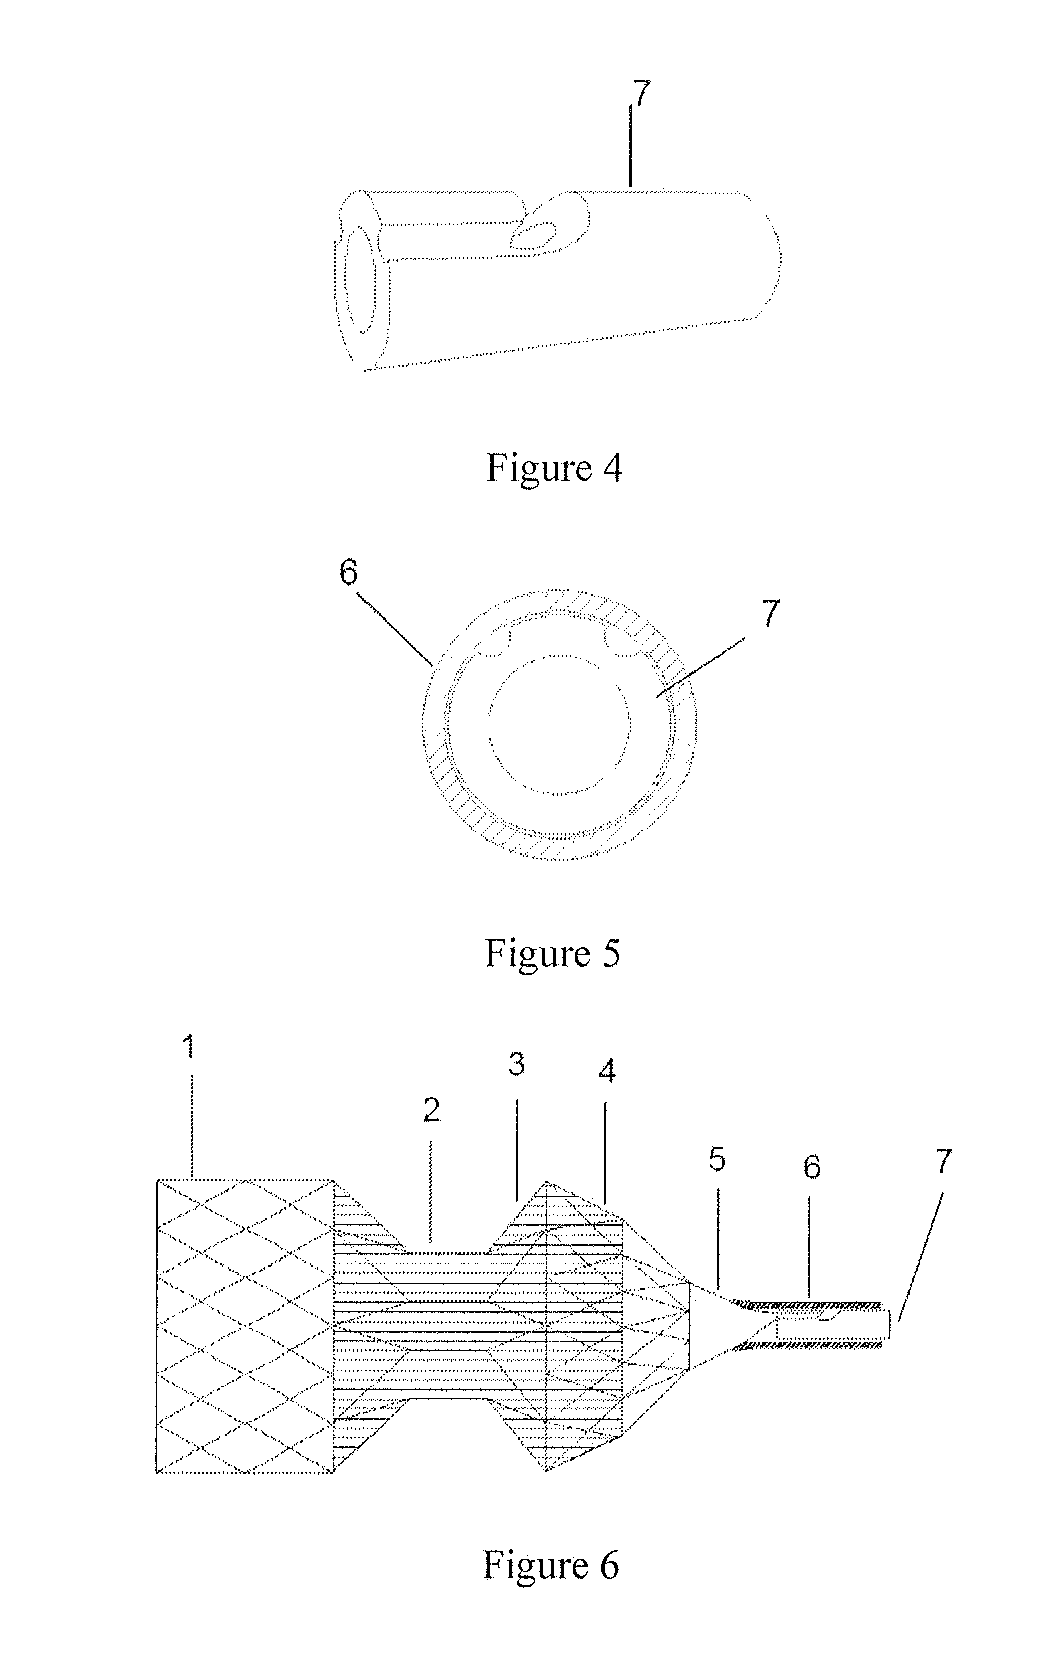 Recyclable and adjustable interventional stent for intravascular constriction